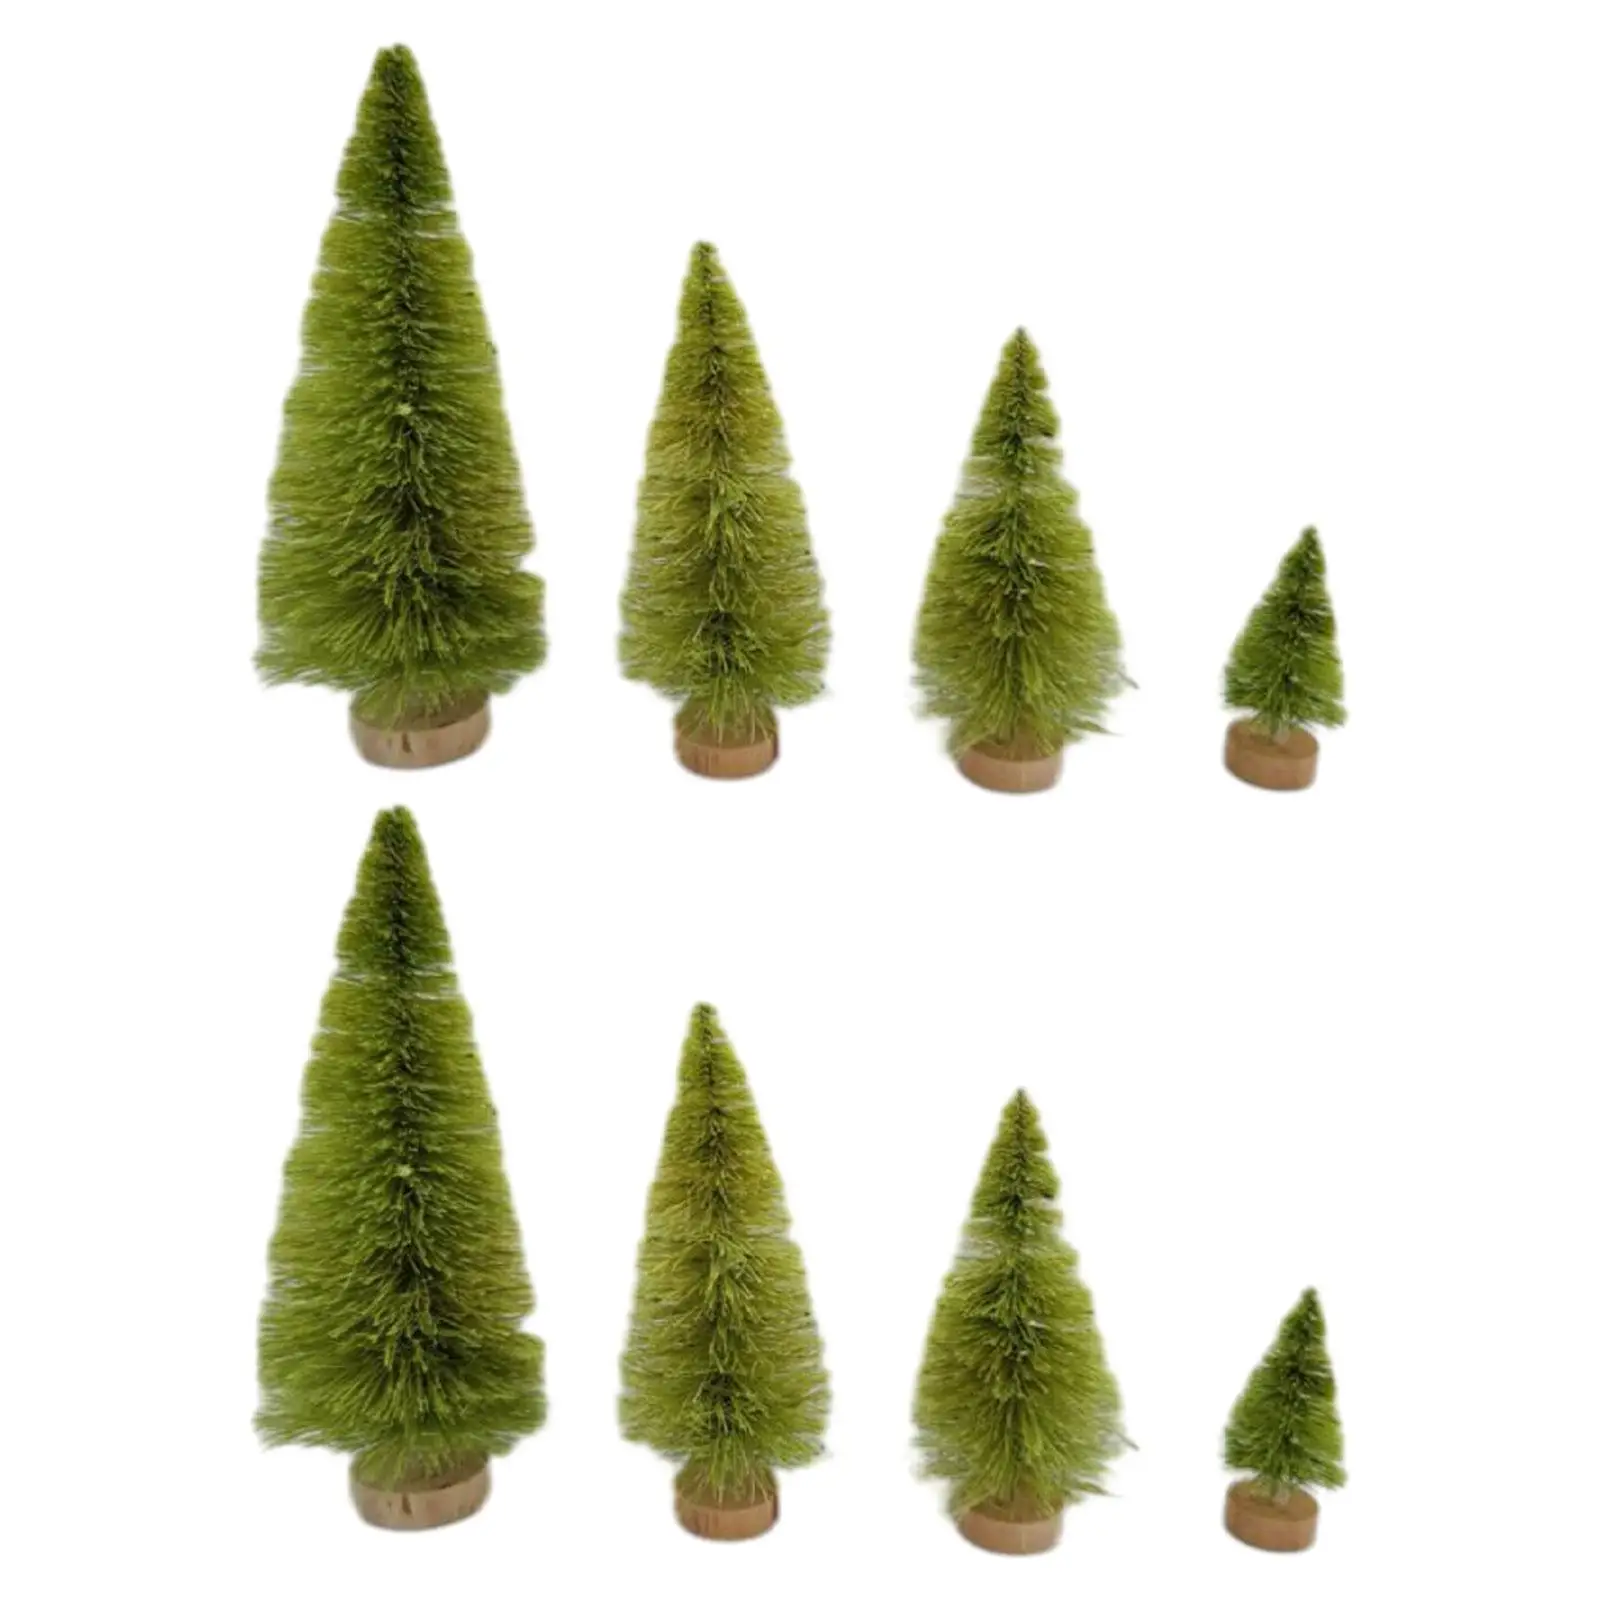 8Pcs Artificial Christmas Trees Wood Base Small Desktop Pine Trees Xmas Trees for Centerpiece Shop Display Indoor New Year